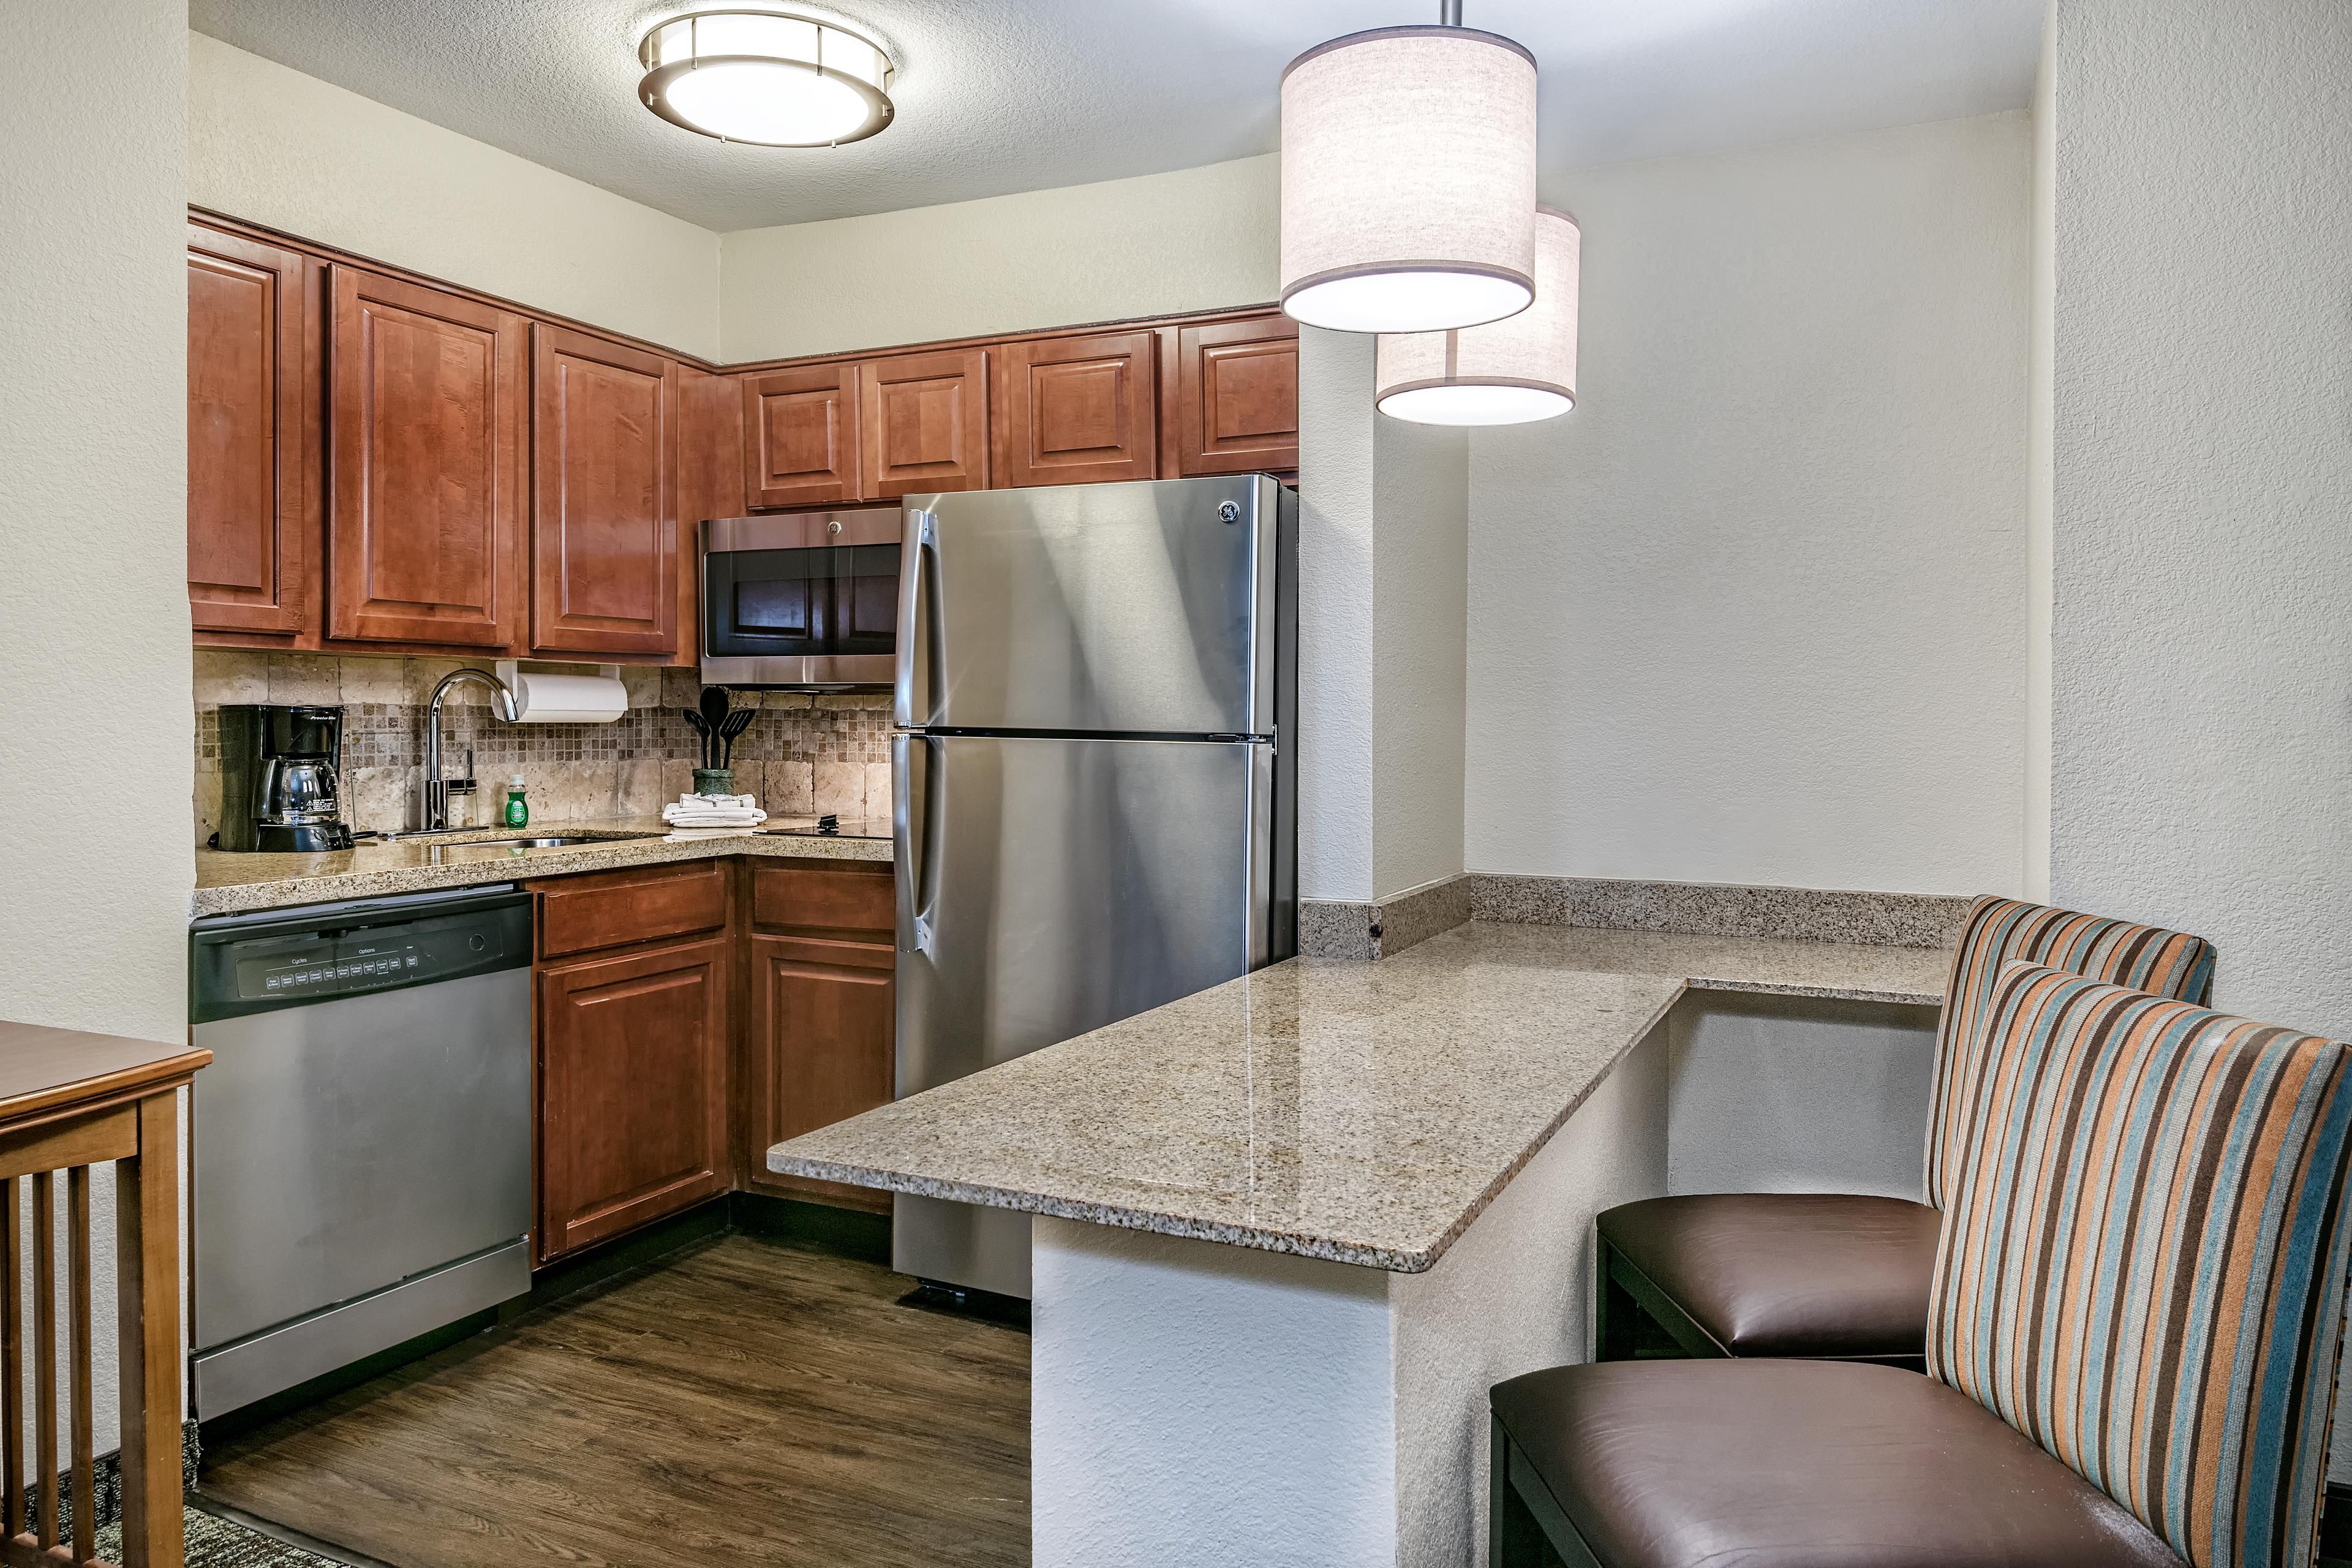 Located just minutes from St. David's and BSW Round Rock Medical Centers. Day use rooms and long term suites are available.